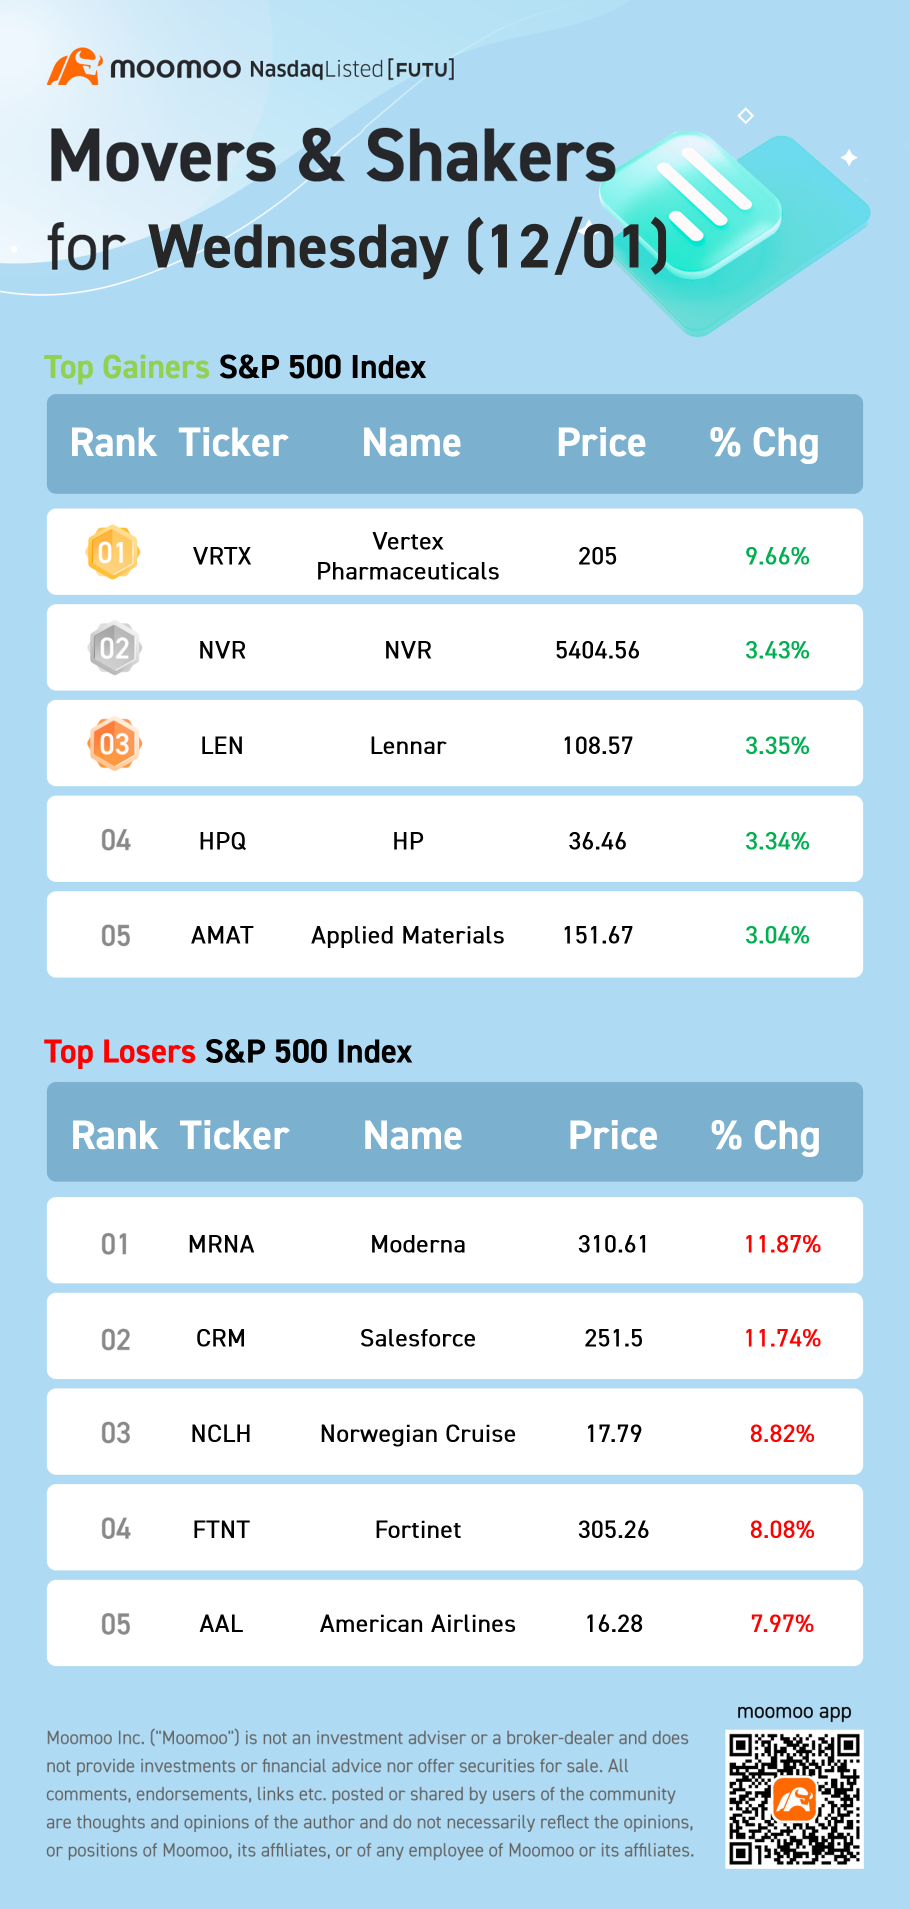 S&P 500 Movers for Wednesday (12/01)